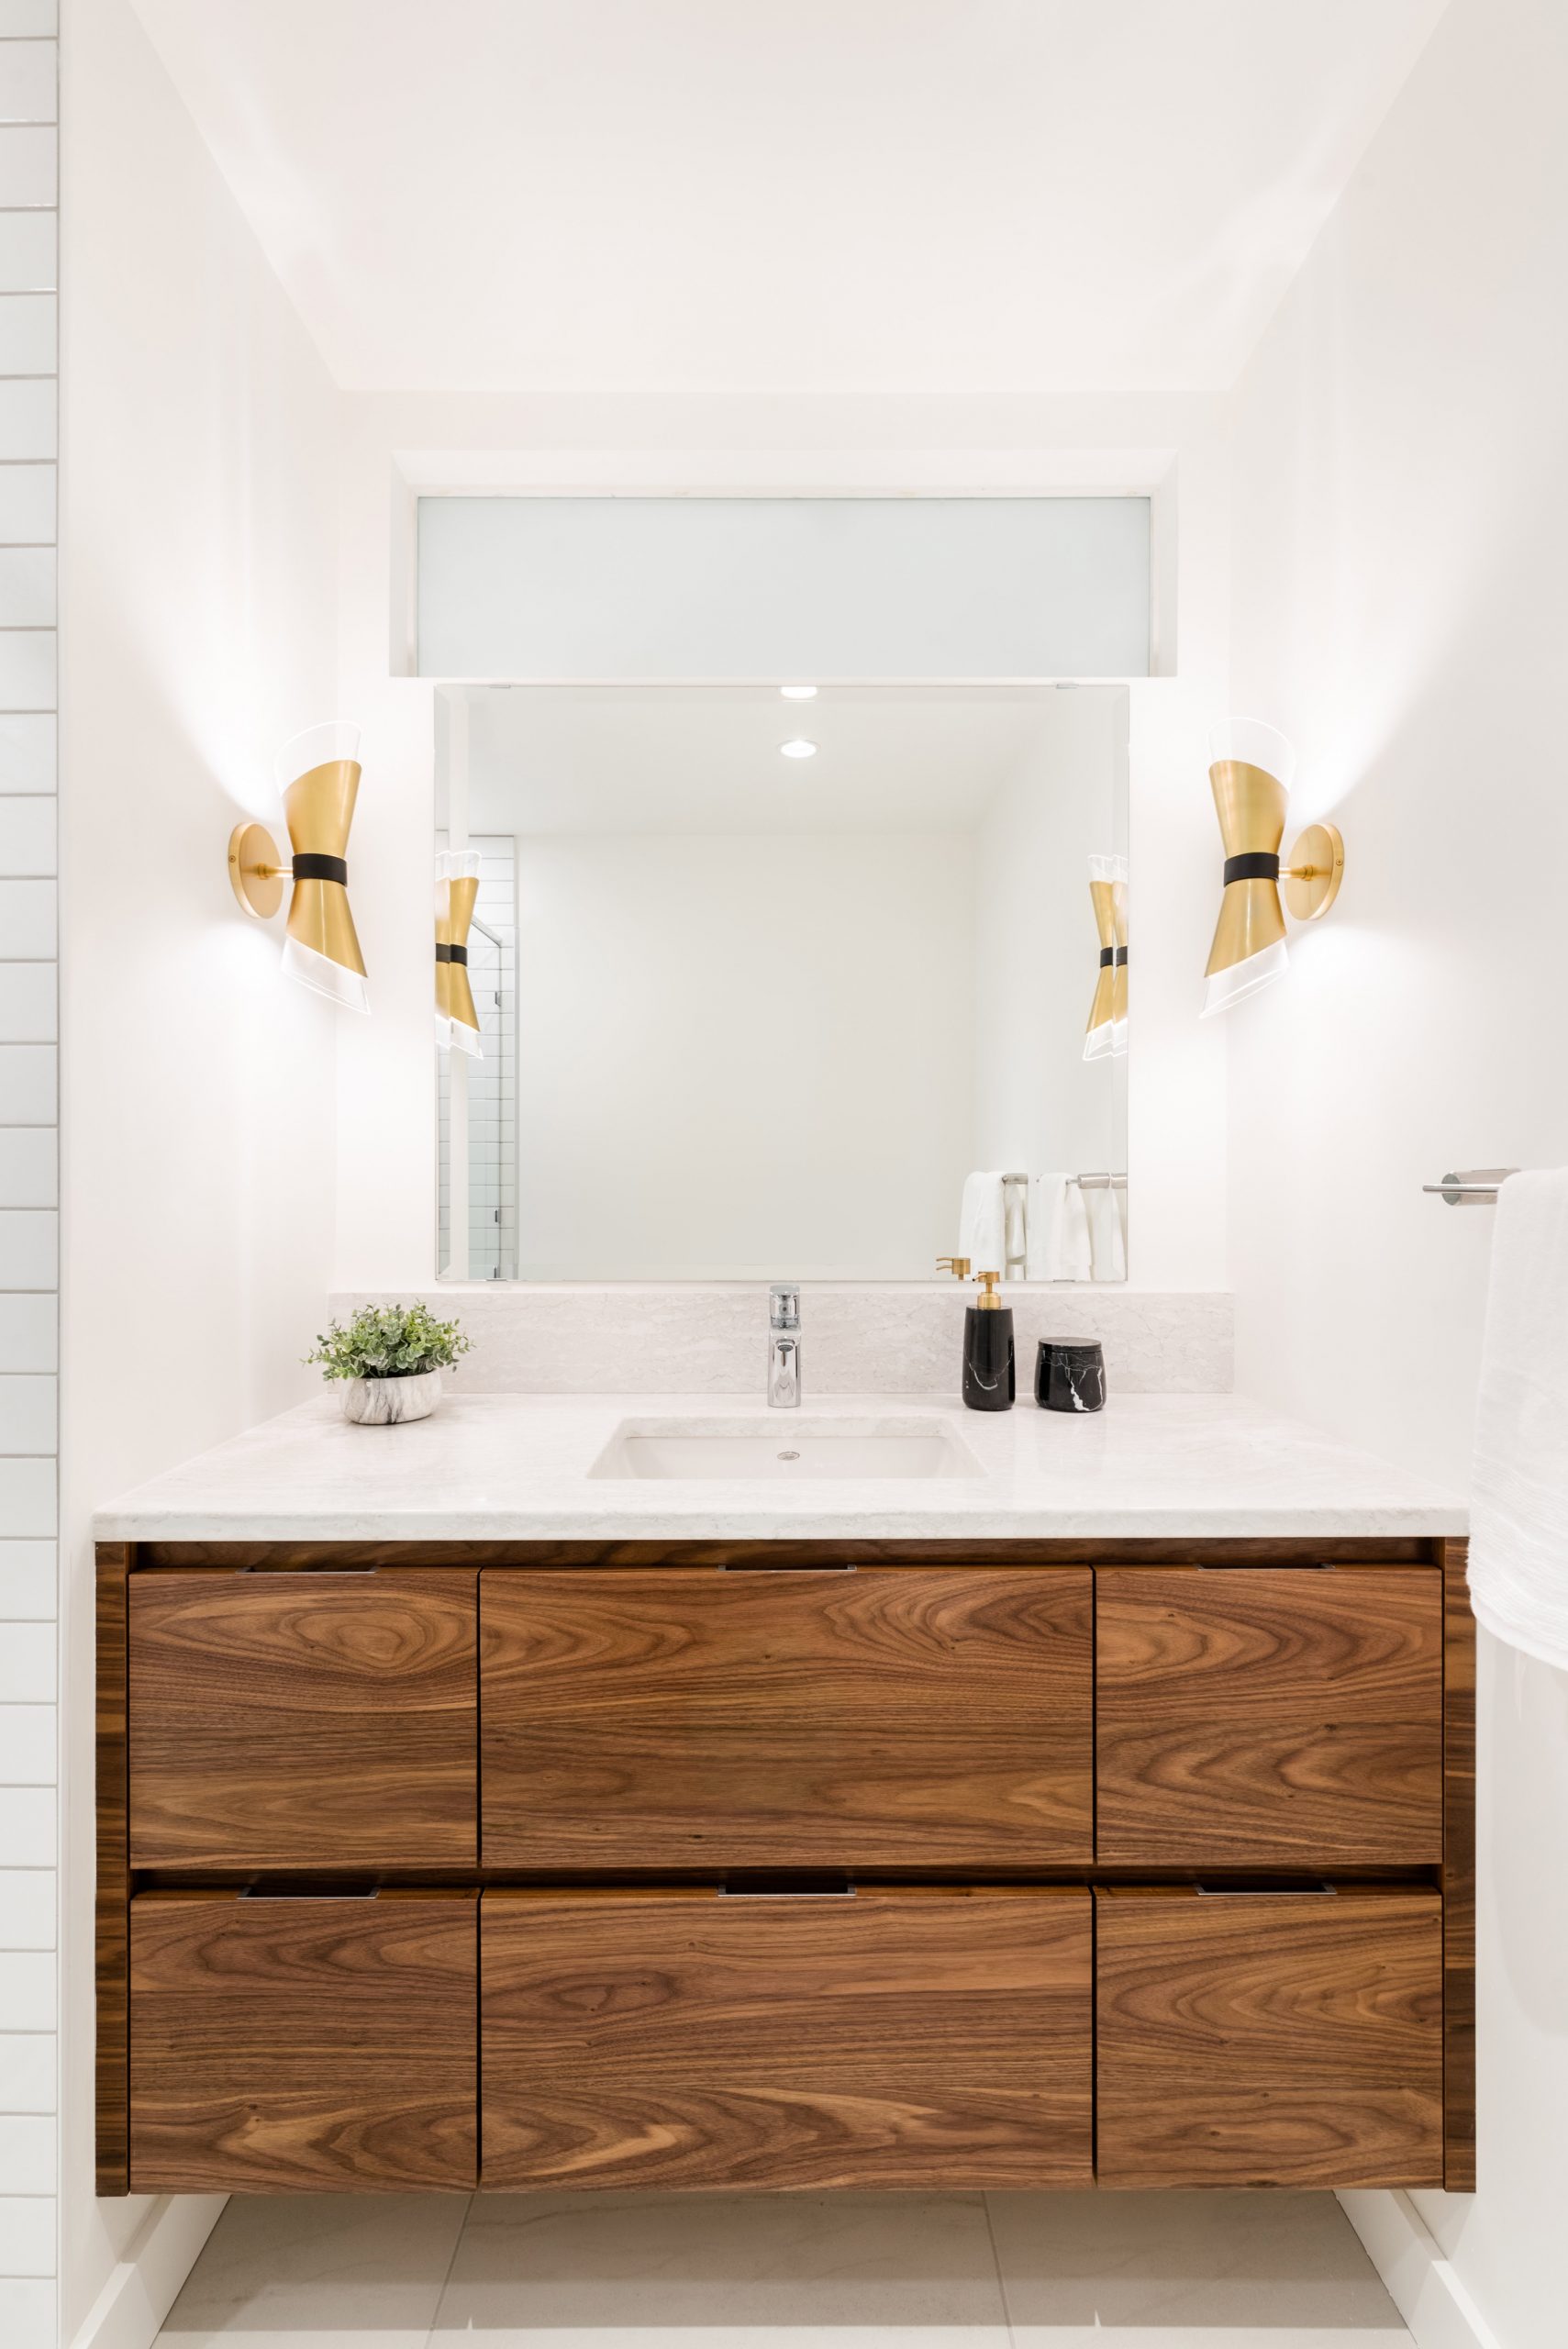 Elmwood Wood Cabinets Kitchen - Brentwood Bay bathroom project 1 - vertical overview